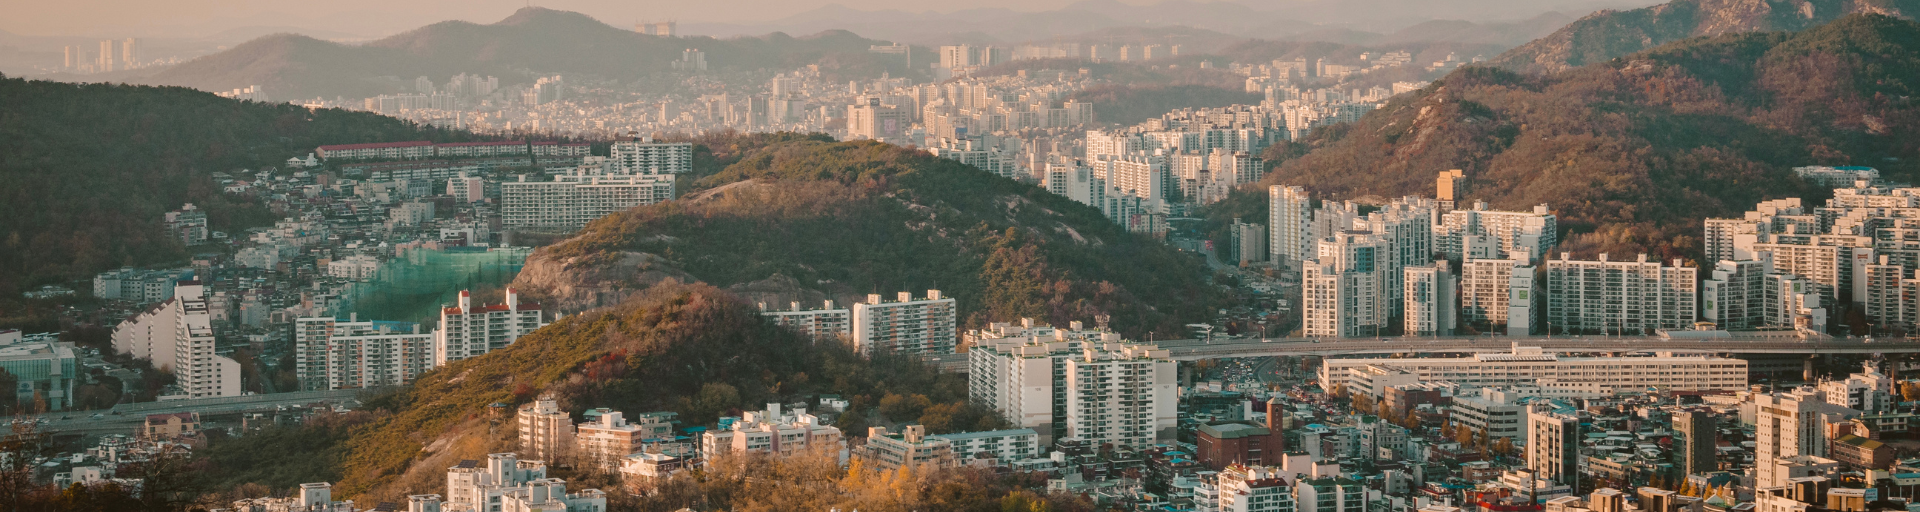 A view of Seoul on the Global Network Program